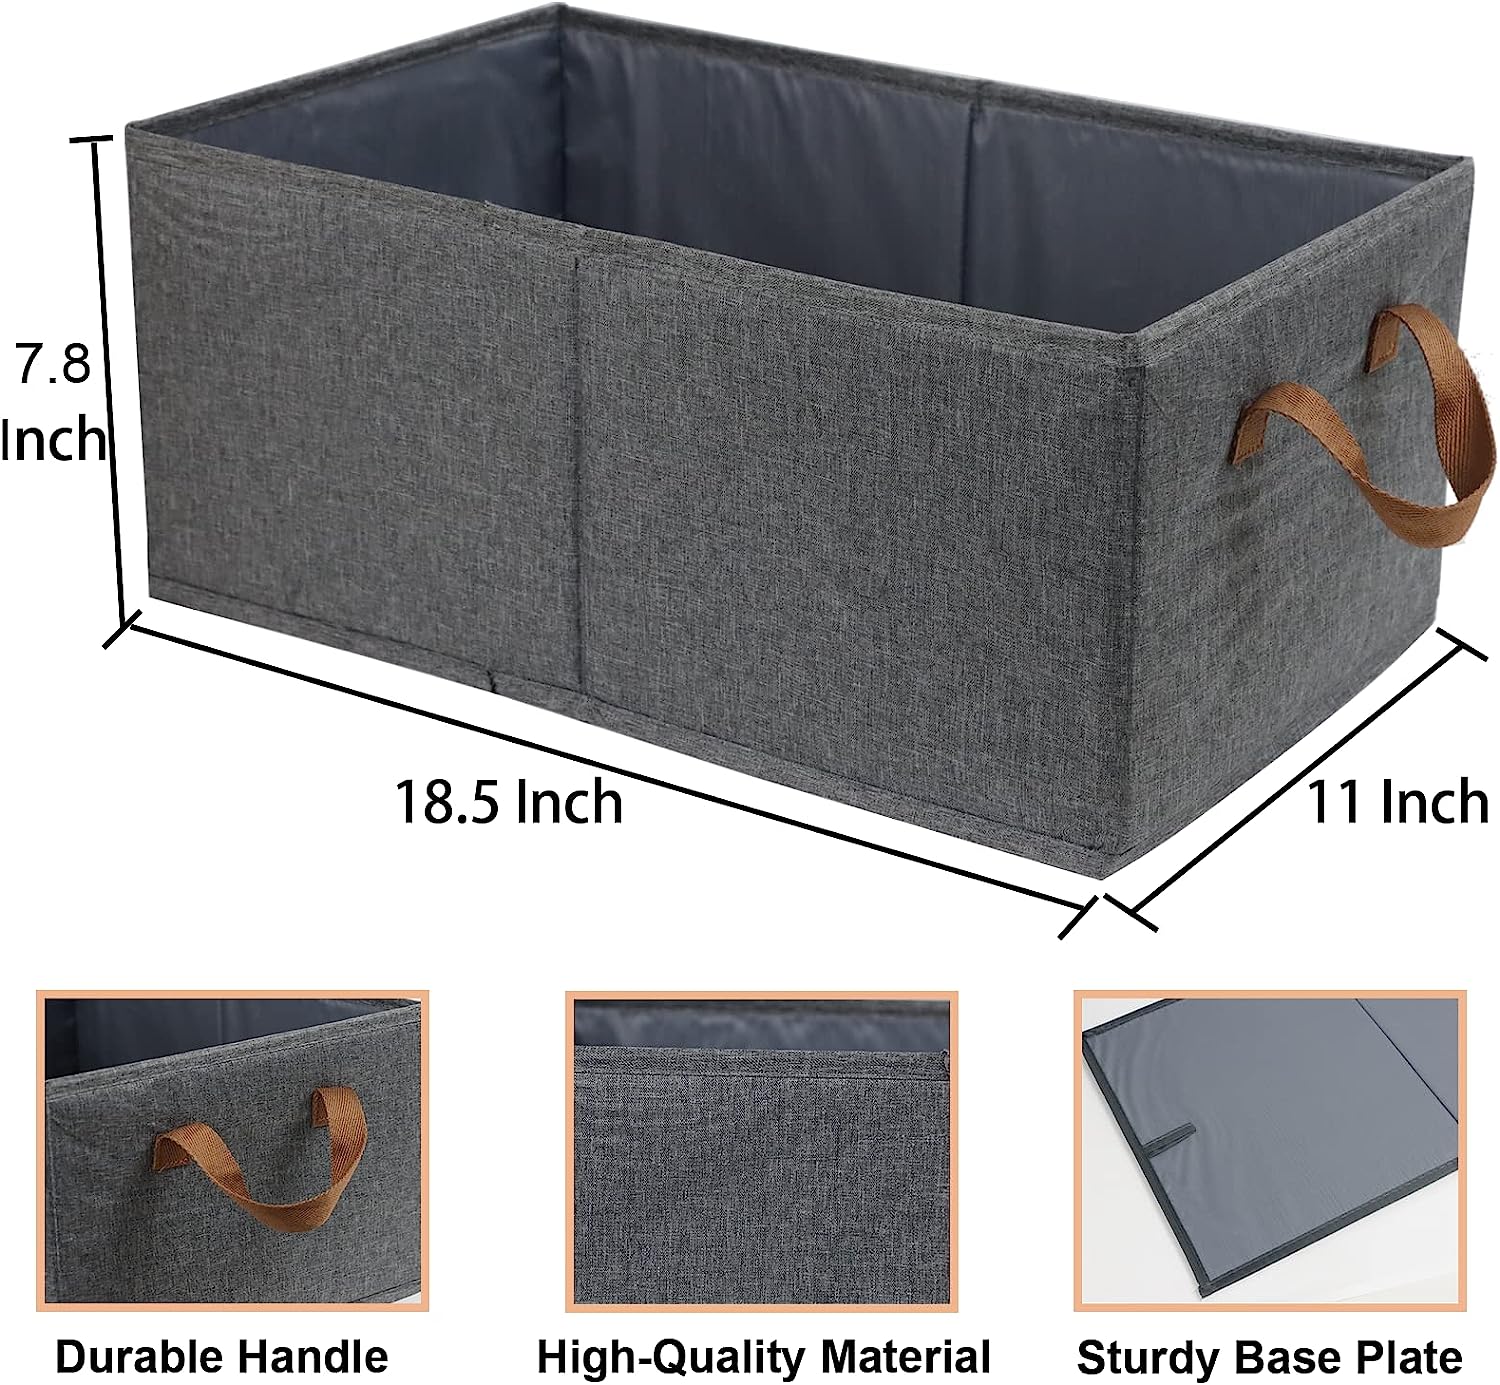 Blushbees® 3-Pack Large Capacity Storage Bins - Sturdy Foldable Boxes